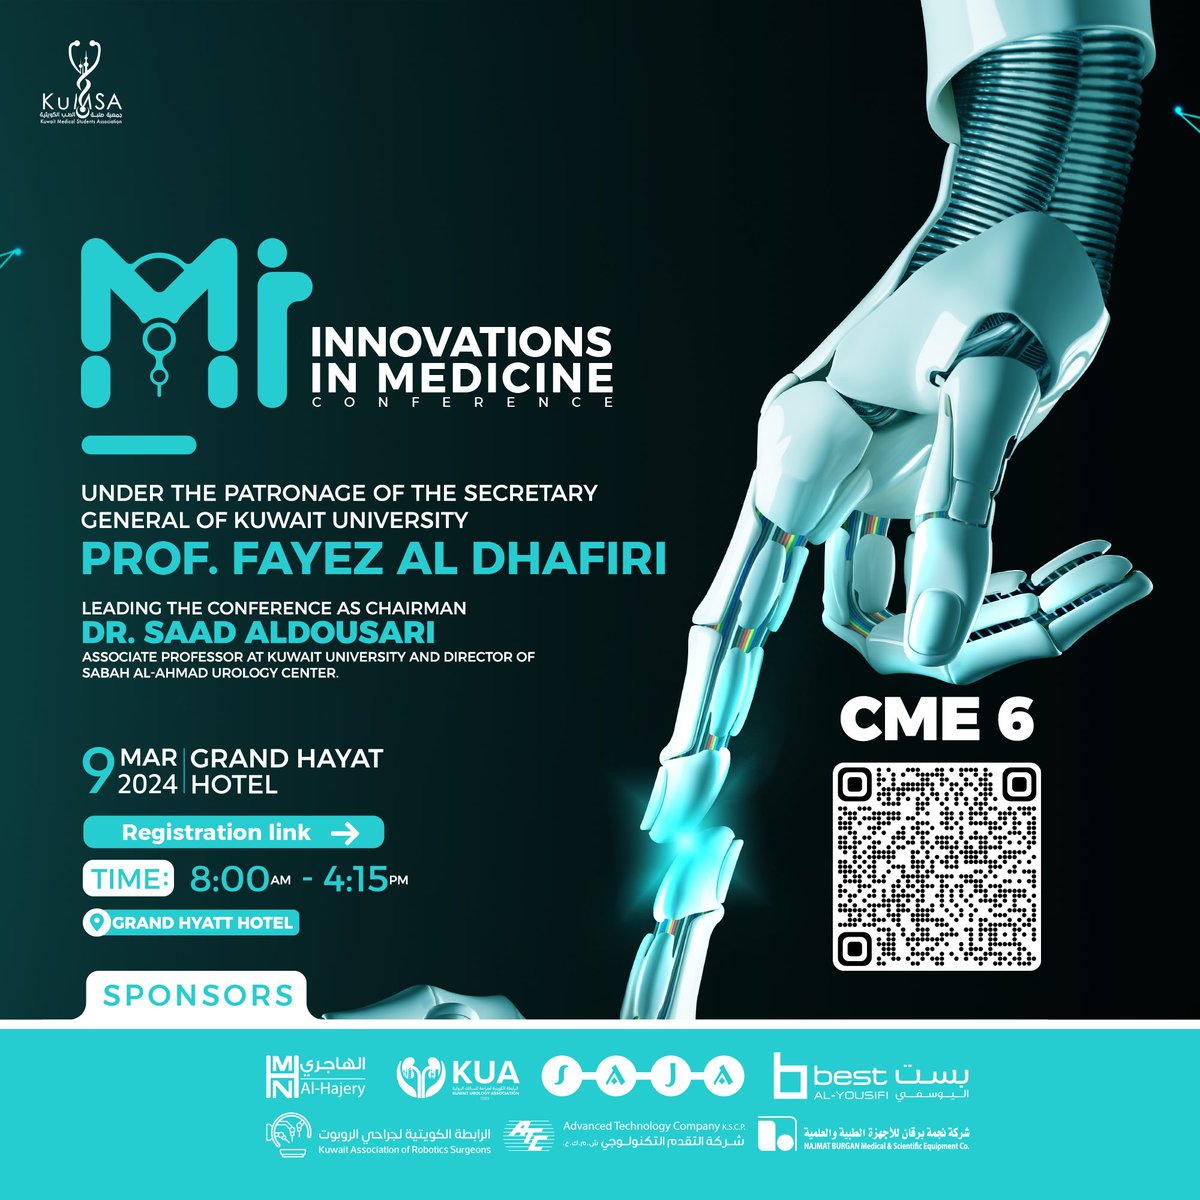 The once unmatched miracle to cut into a body is contended by today's innovations in robotics and artificial intelligence. To convey this growth, we proudly announce the 'Innovations In Medicine' conference, the first student-organised and second robotics conference in Kuwait!…